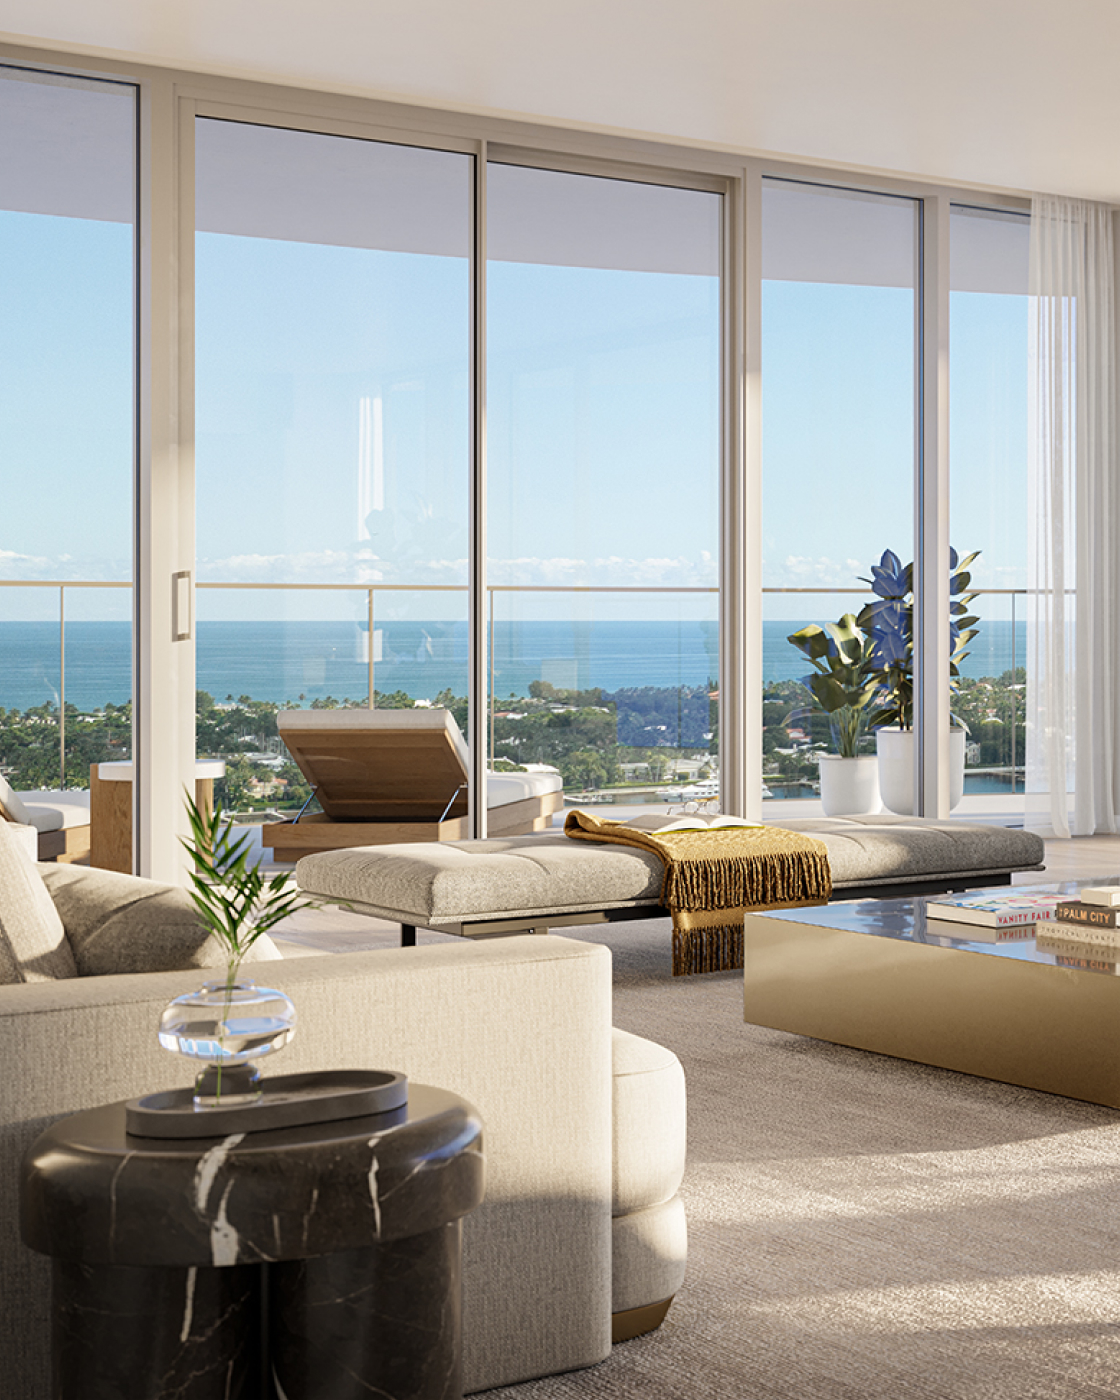 luxury interiors of living room with views of the ocean